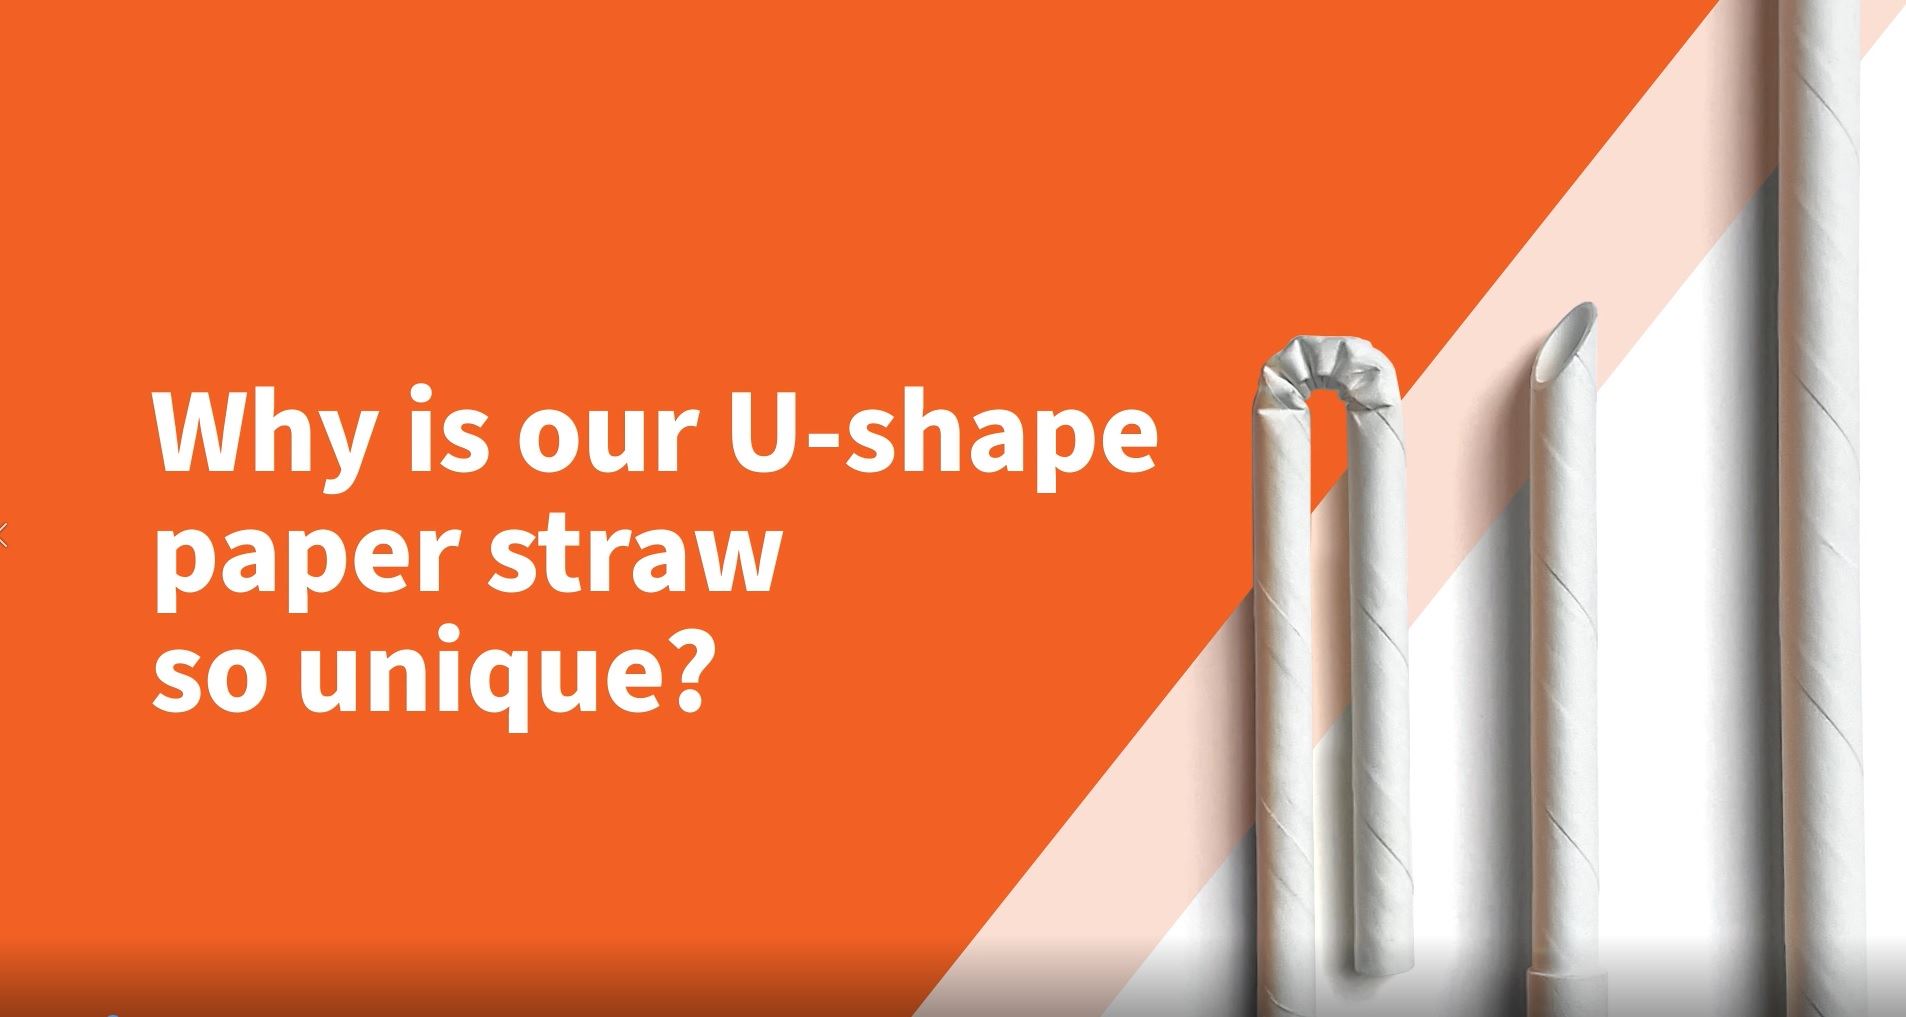 Tembo Paper’s U-Shaped Straws: Why Are They So Unique?